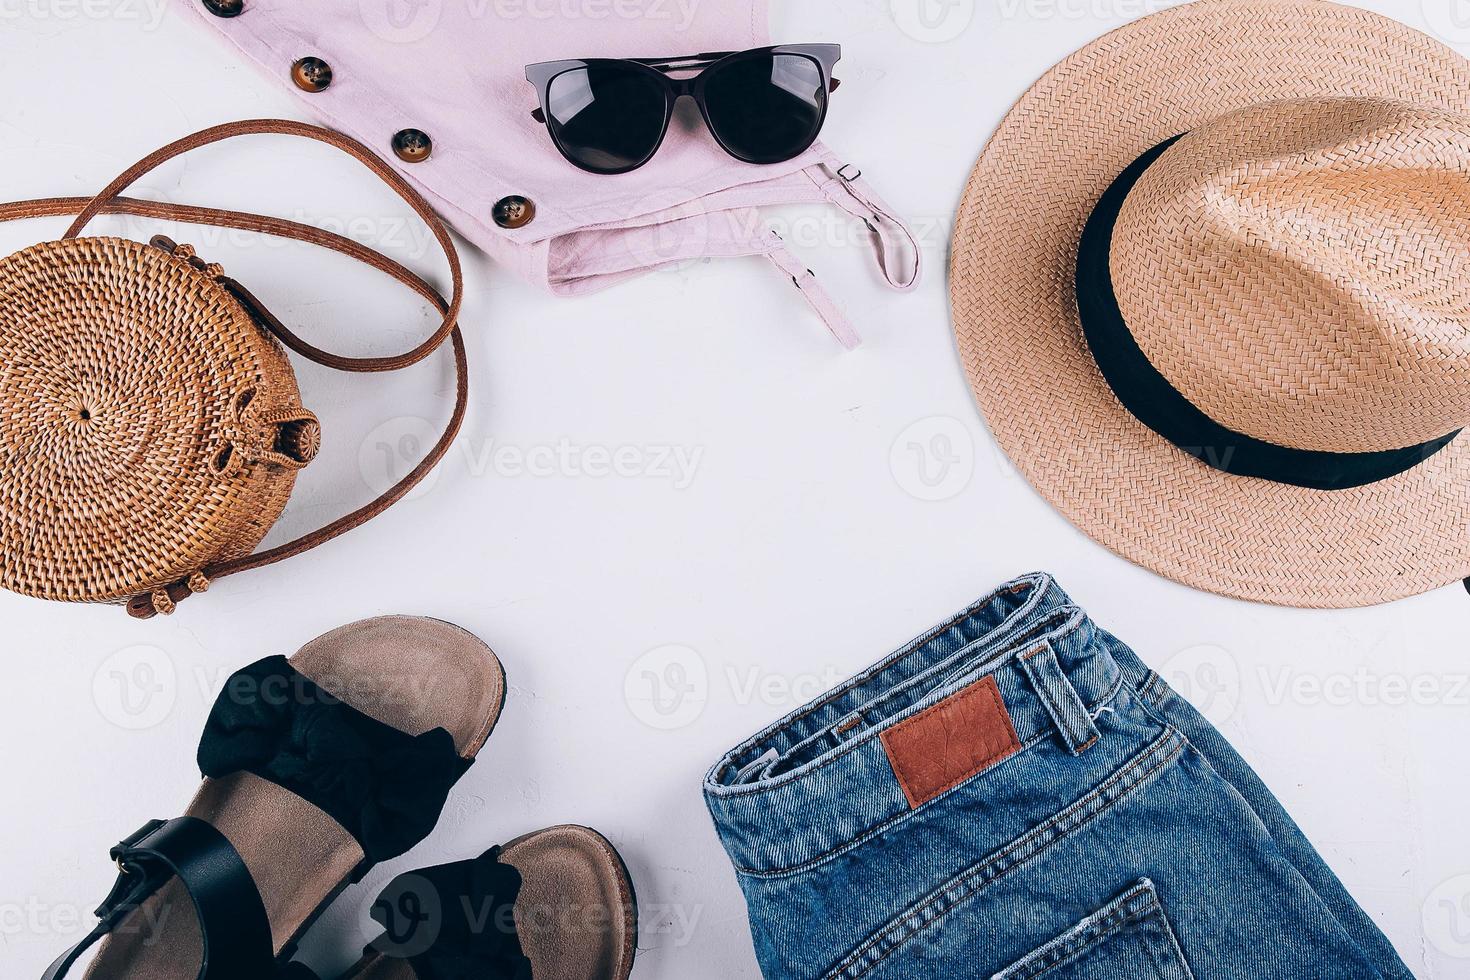 Overhead summer still life. Casual women's clothing, accessories. Vacation, travel concept. Flat lay photo